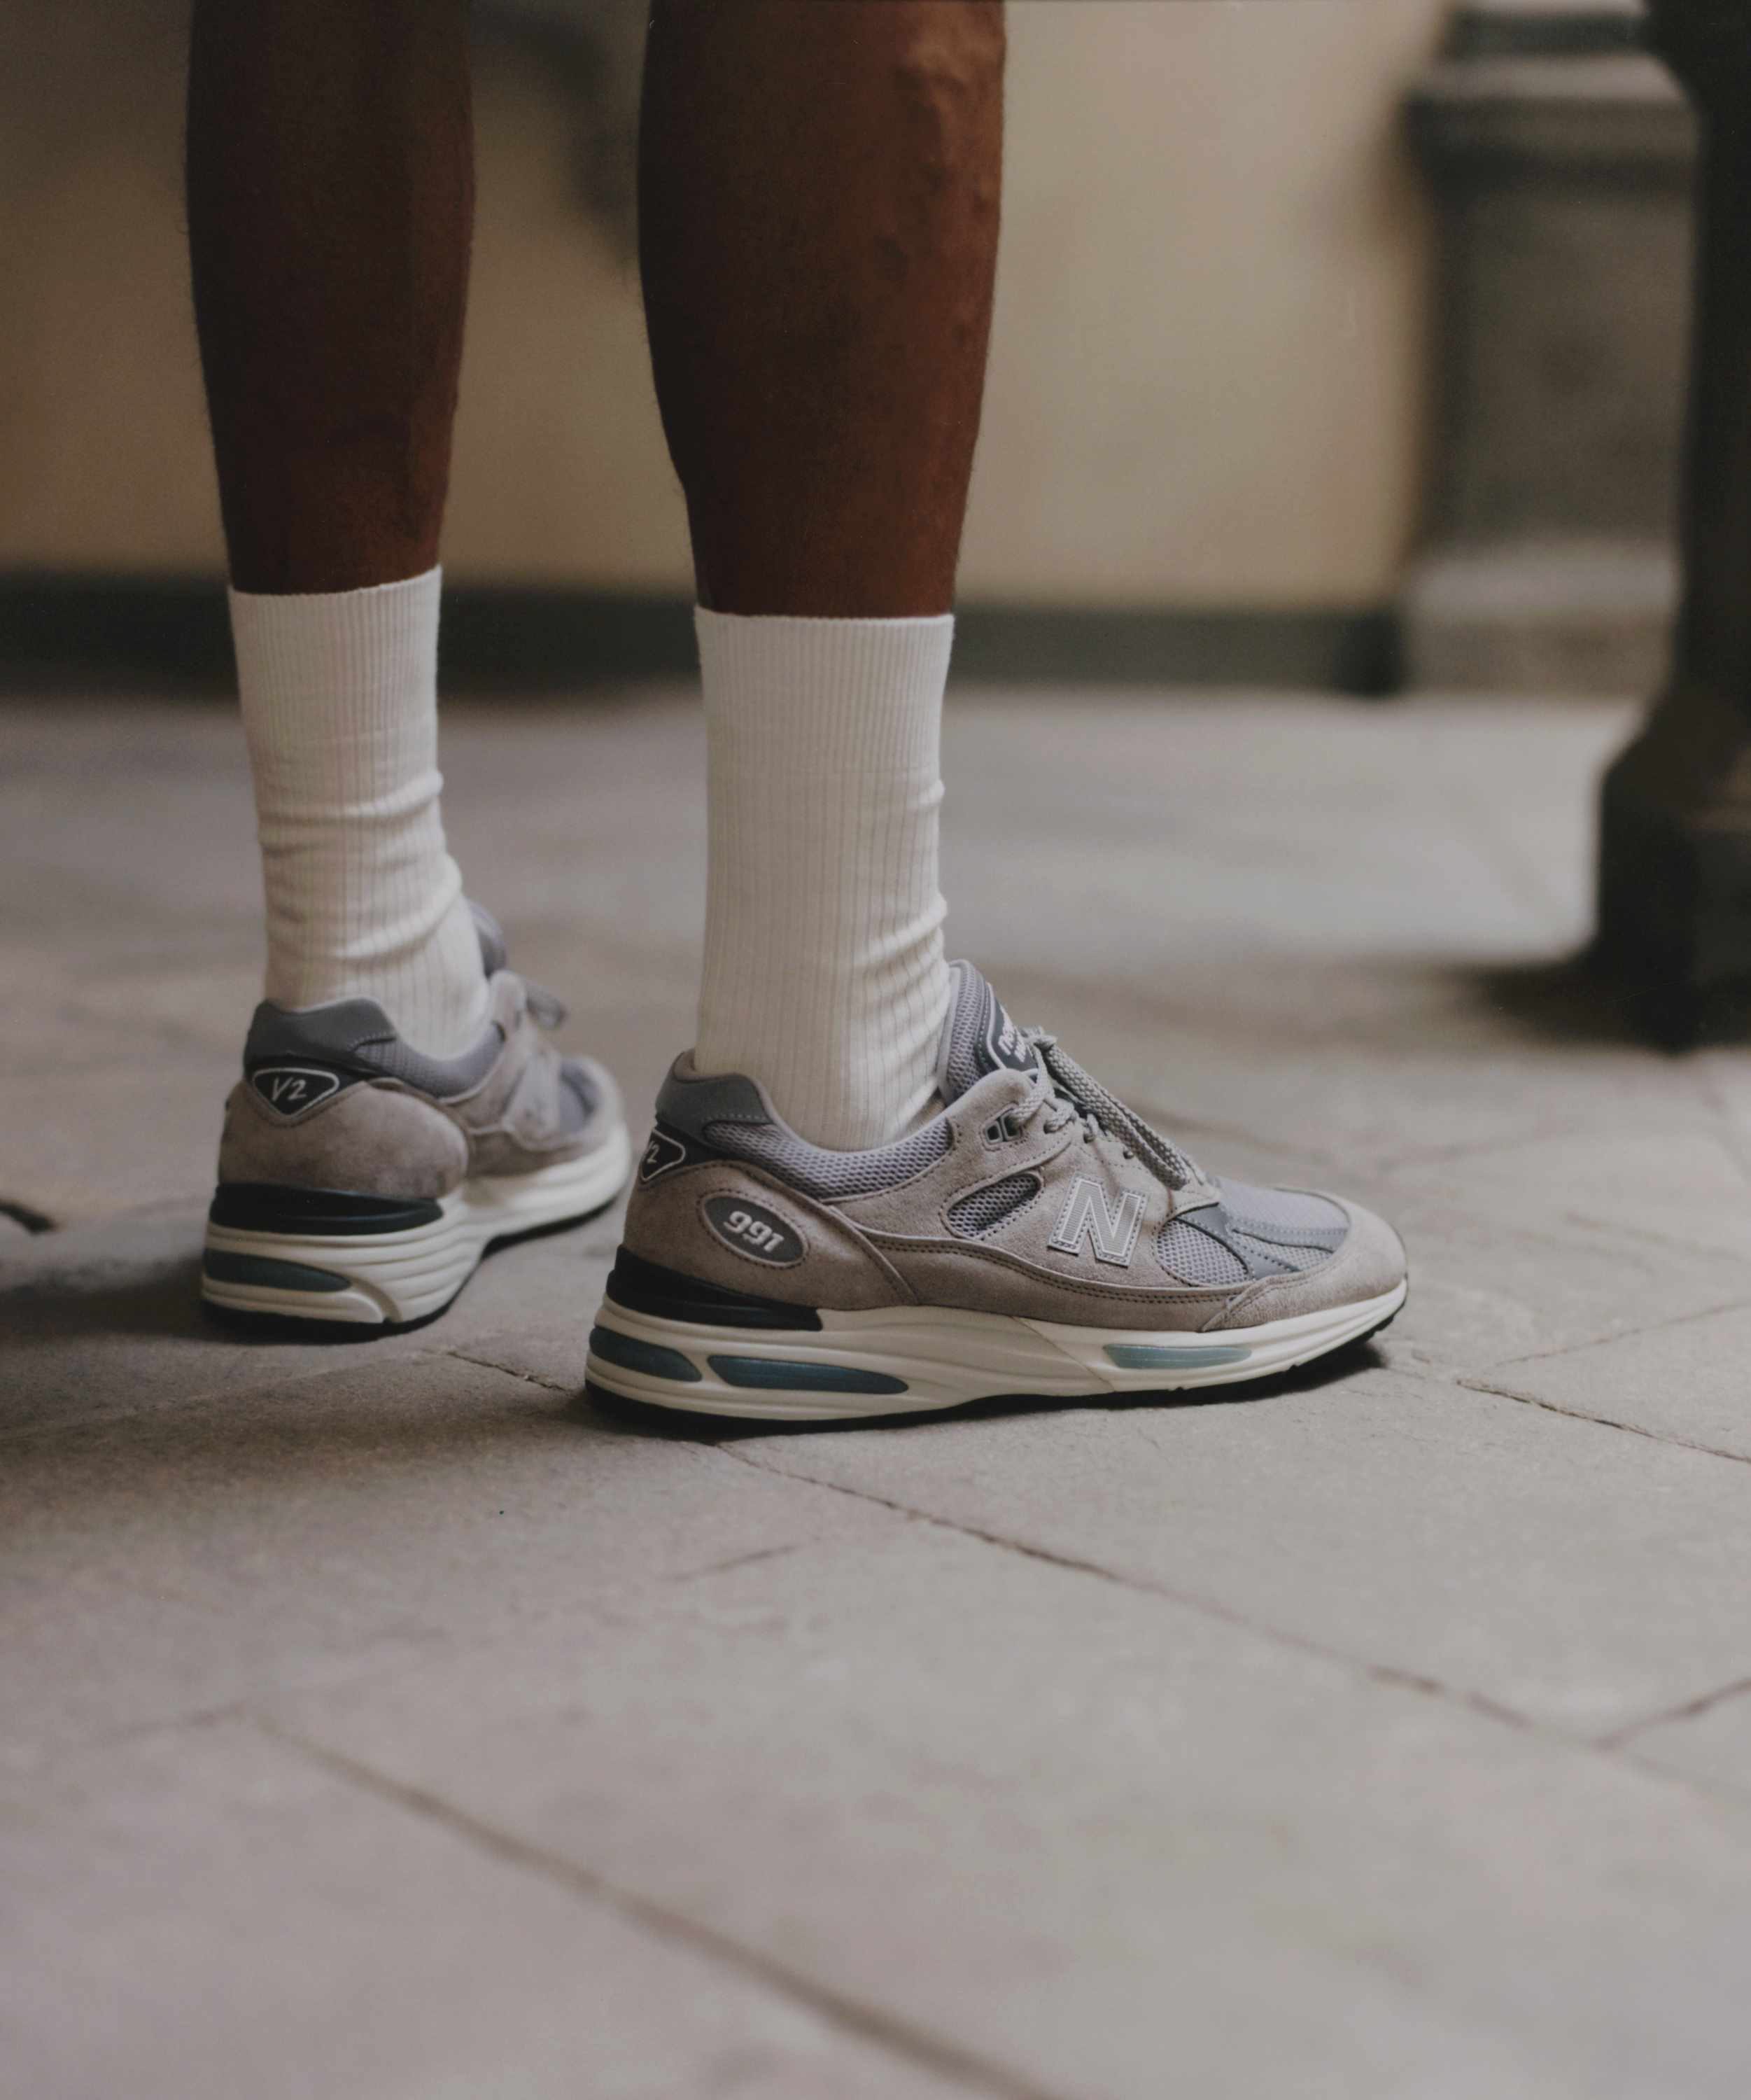 Lifestyle photos showing Italians wearing New Balance's grey suede 991v2 sneaker